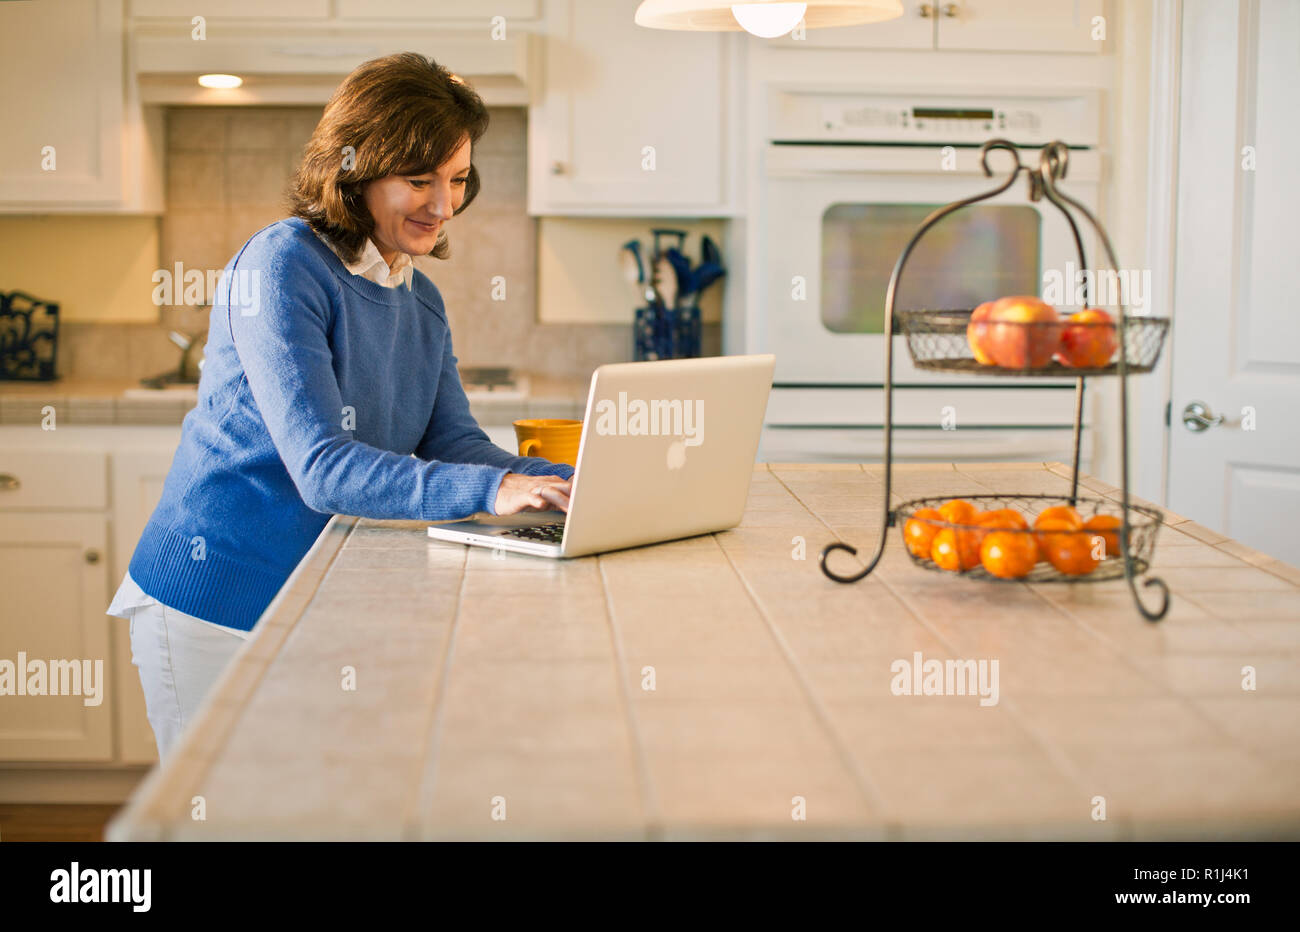 Happy mature woman typing on a laptop in her kitchen. Stock Photo